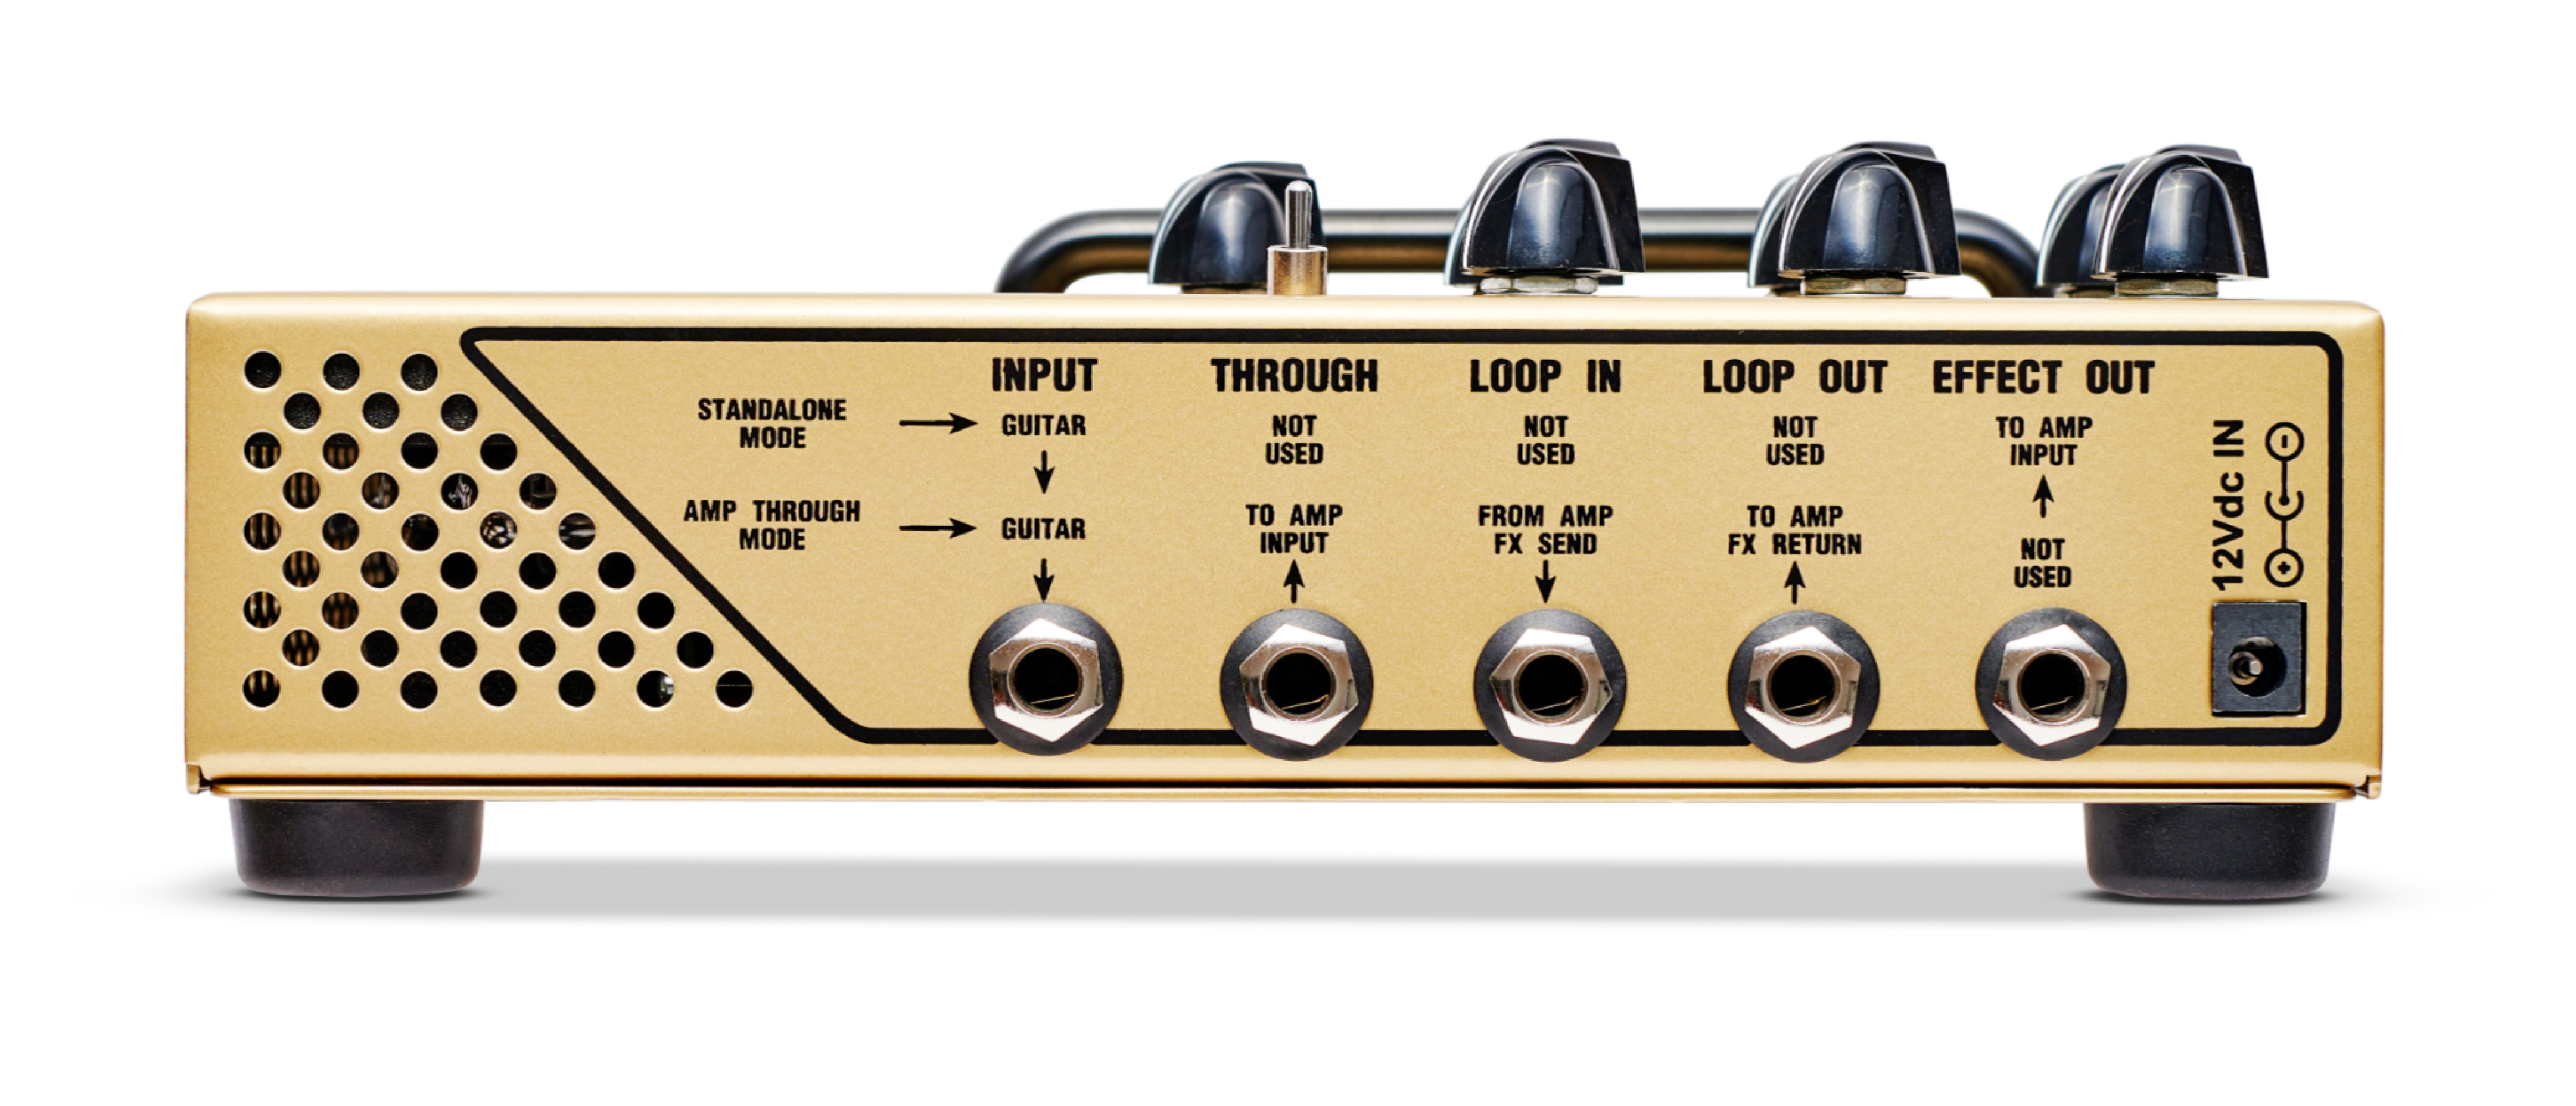 VICTORY V4 The Sheriff Guitar Pedal Preamp